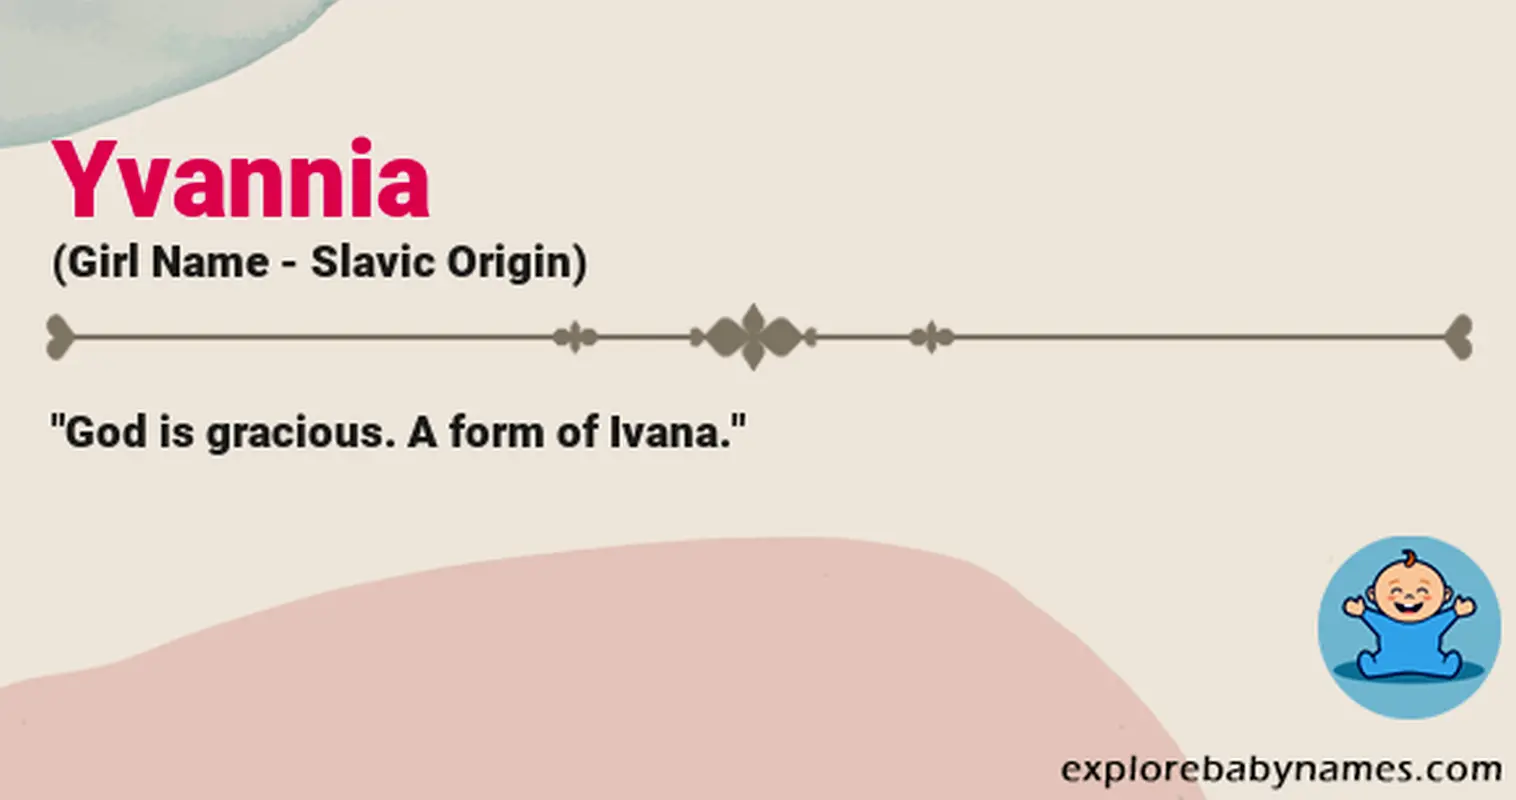 Meaning of Yvannia